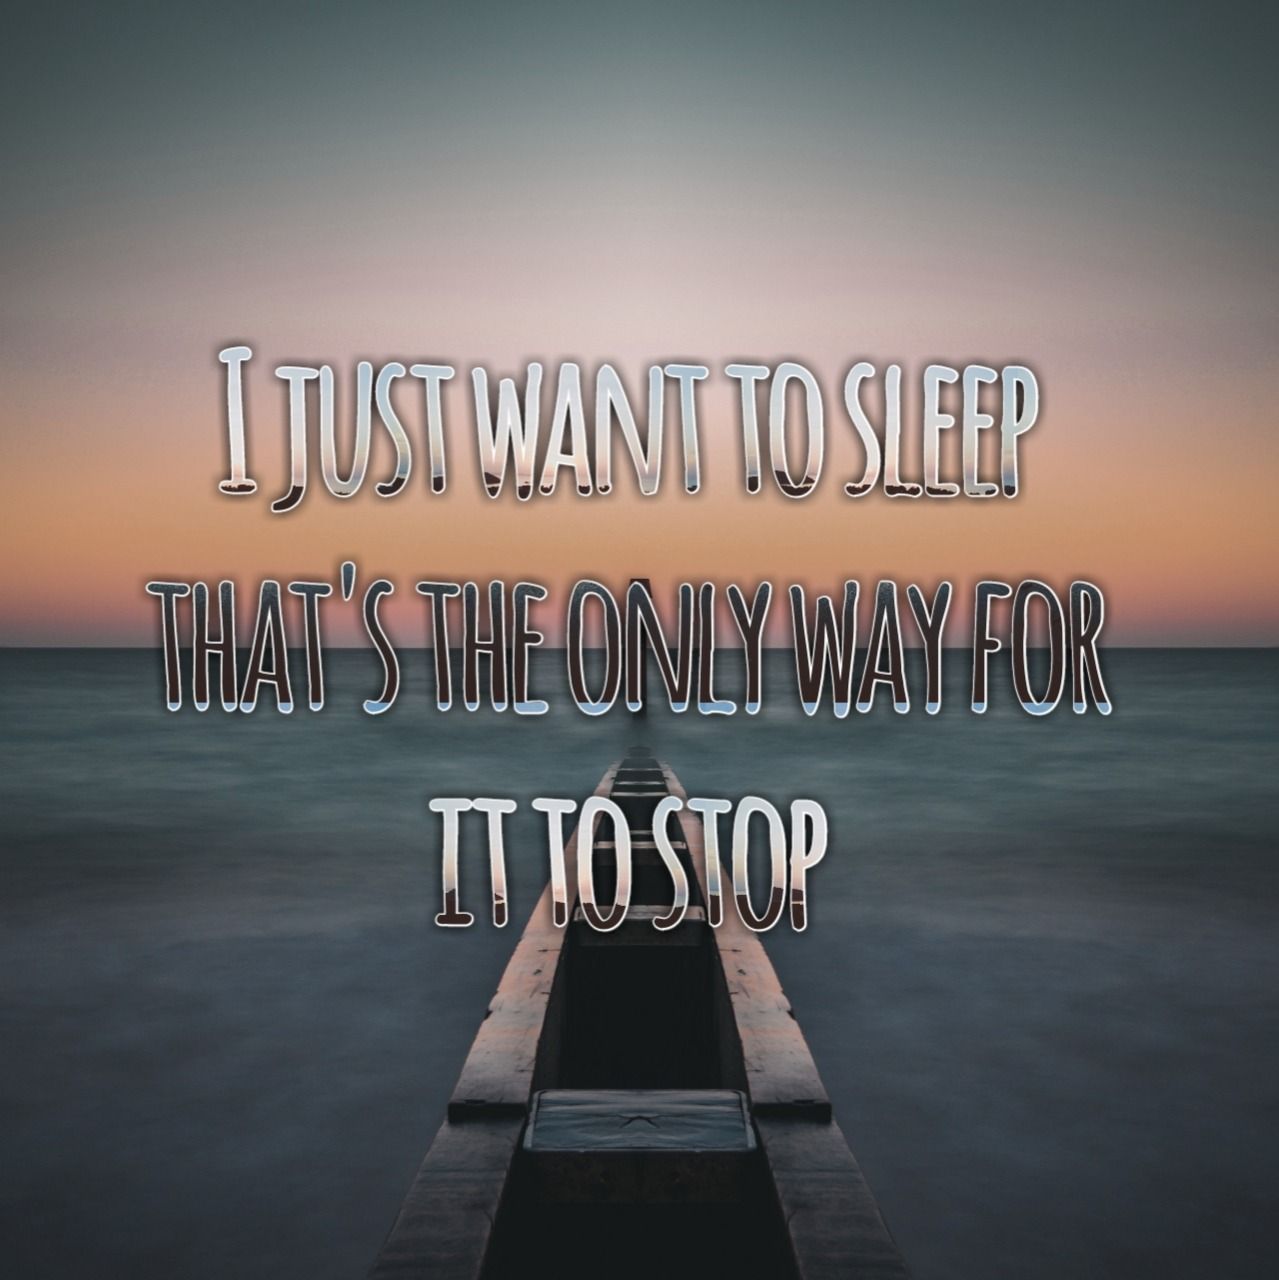 I just want to sleep that's the only way for it - Depression